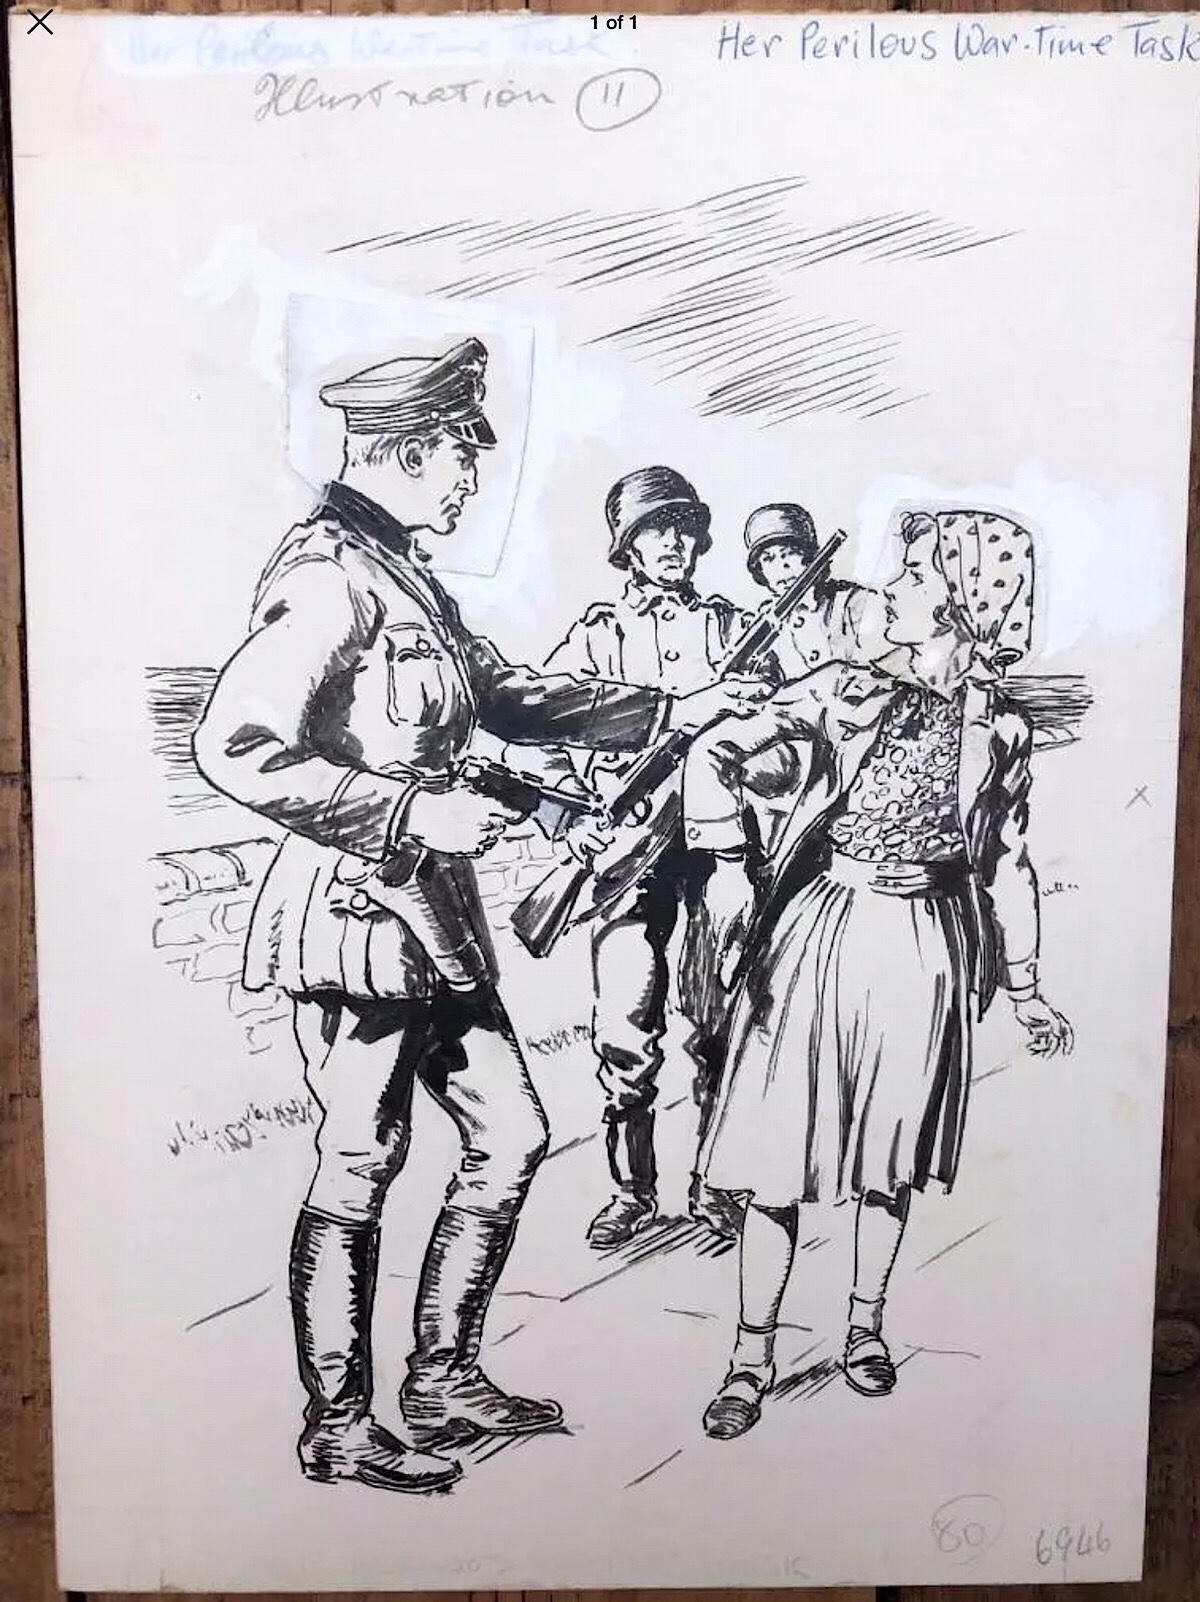 World War Two illustration attributed to Mike Hubbard